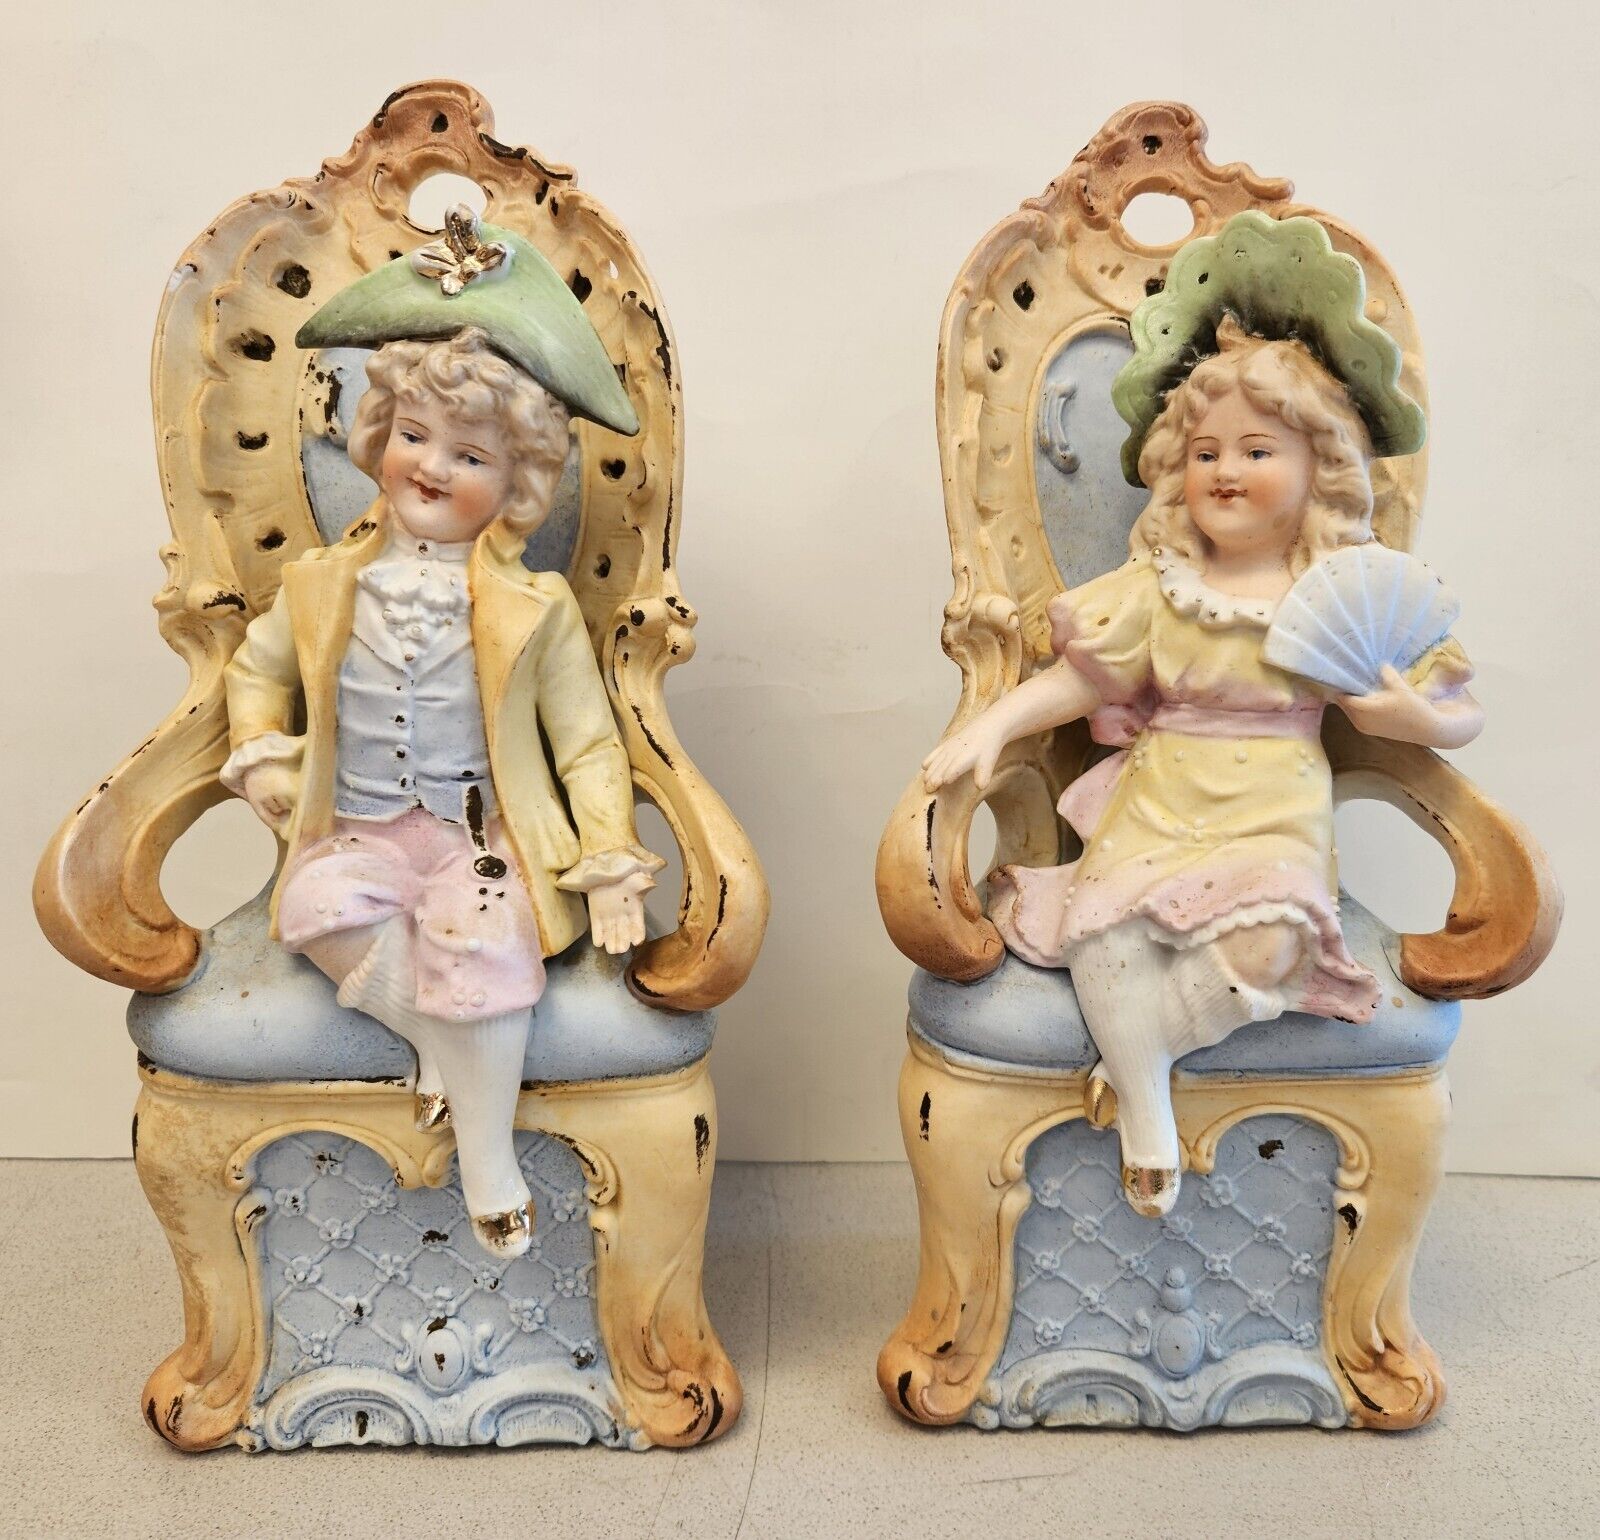 Antique Victorian Porcelain Pair GIRL & BOY ON CHAIRS Figurines Statues GERMANY